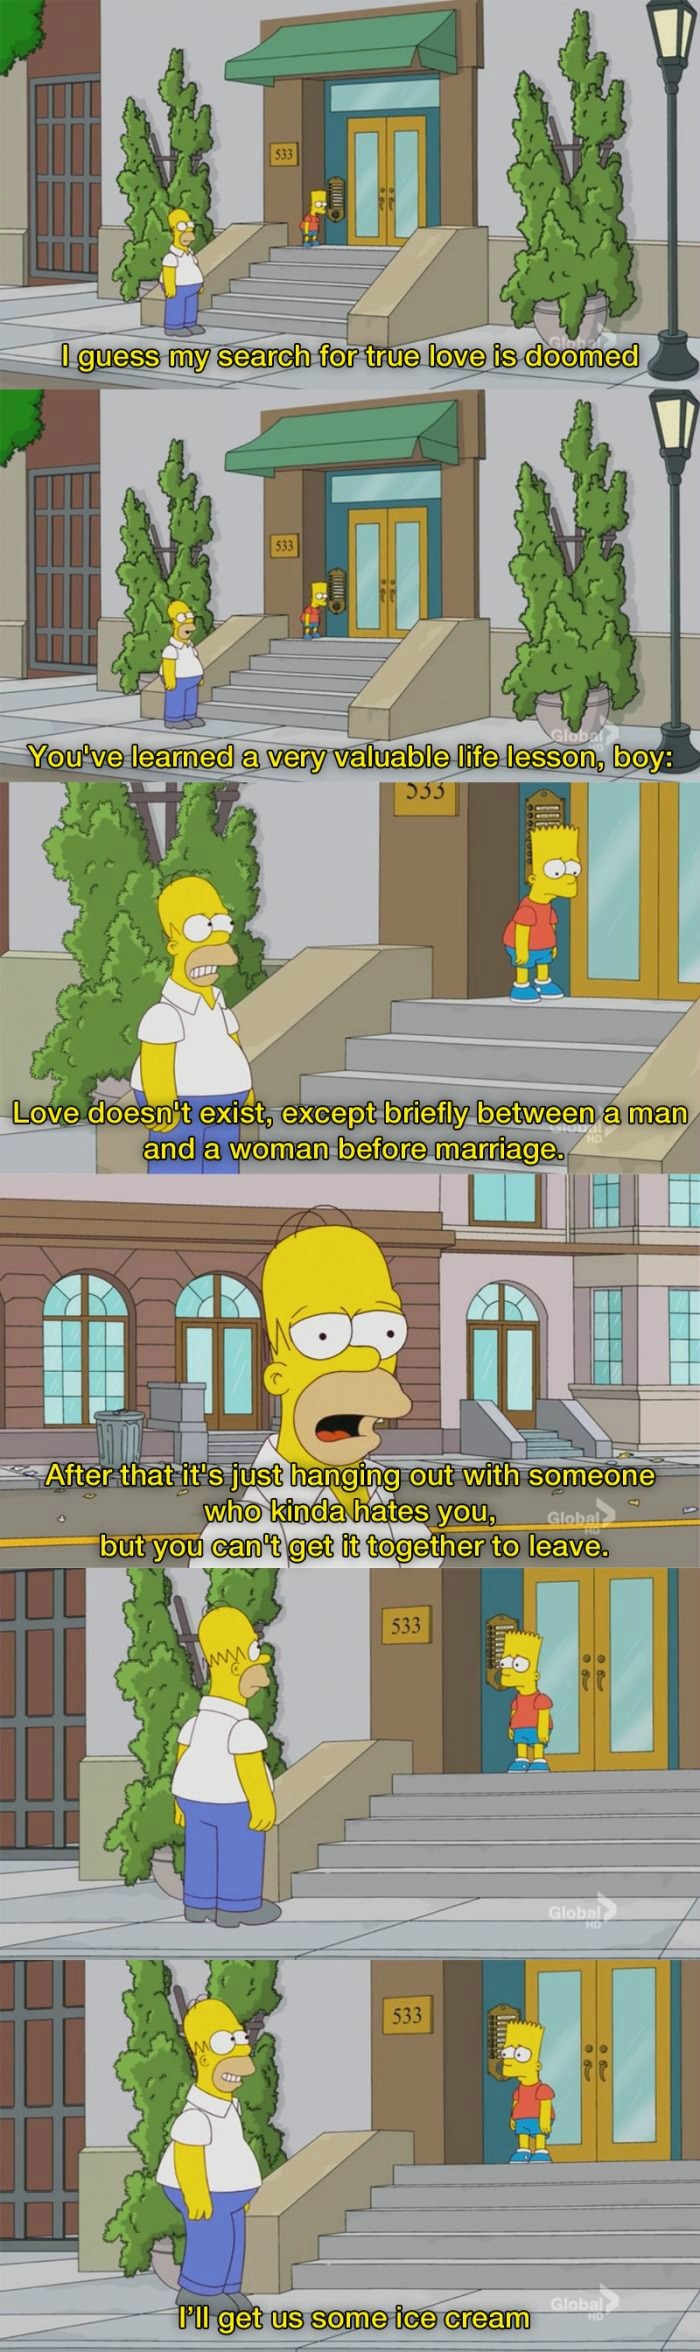 The Simpsons' Hard Truths.